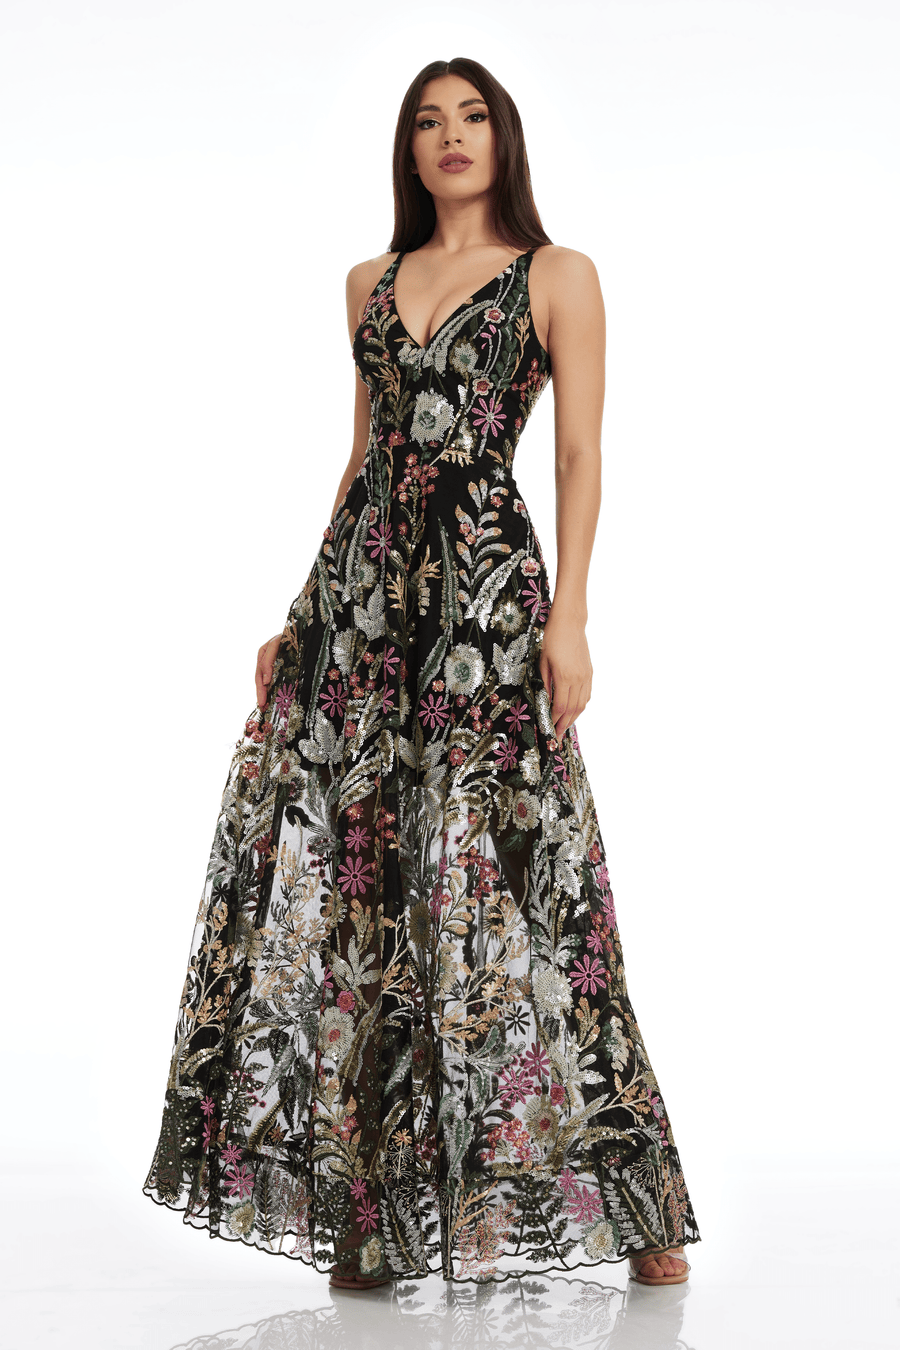 Ariyah Sleeveless Floral Sequin Gown